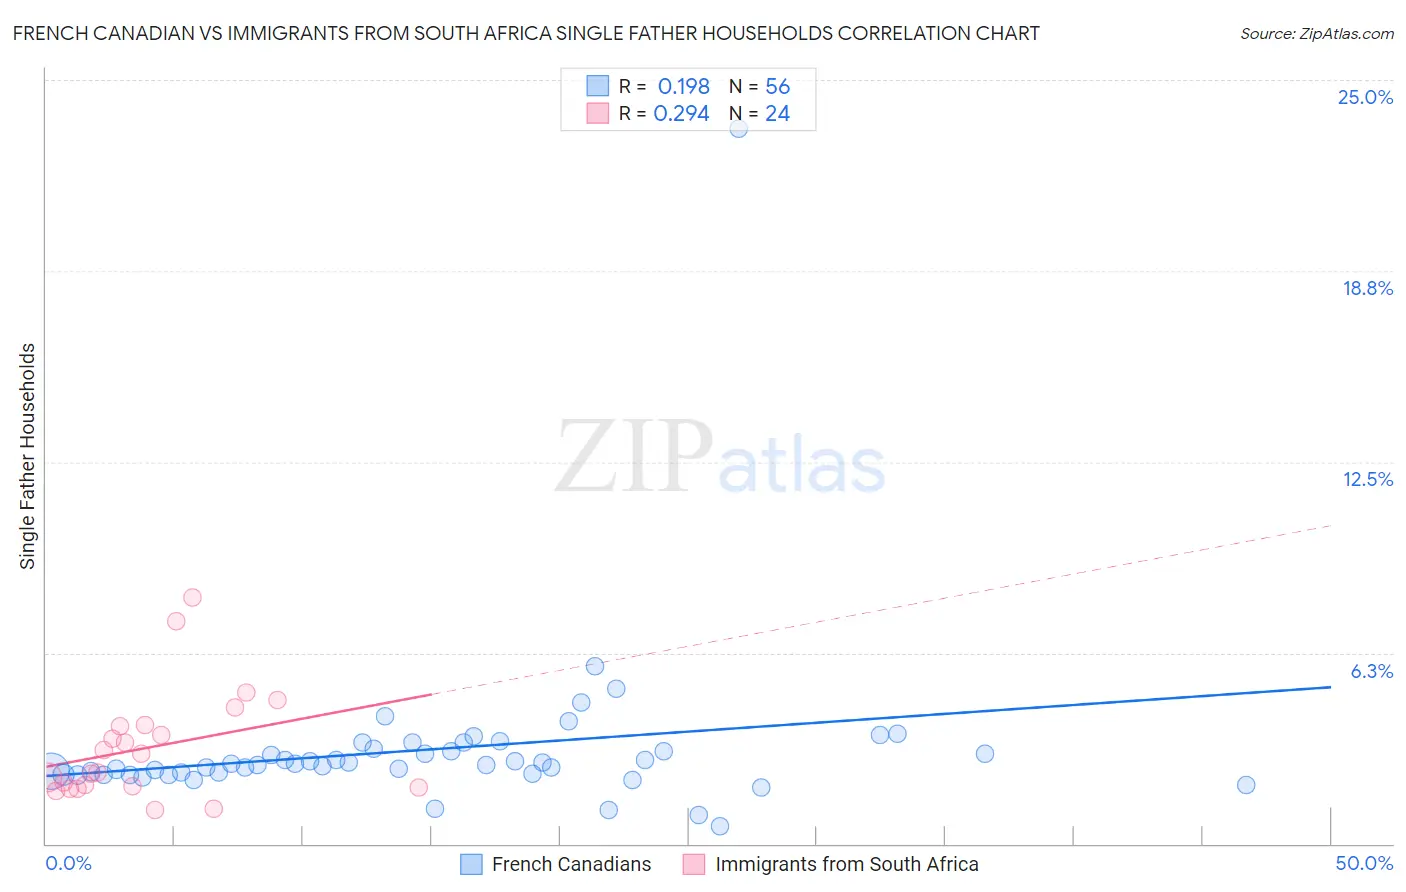 French Canadian vs Immigrants from South Africa Single Father Households